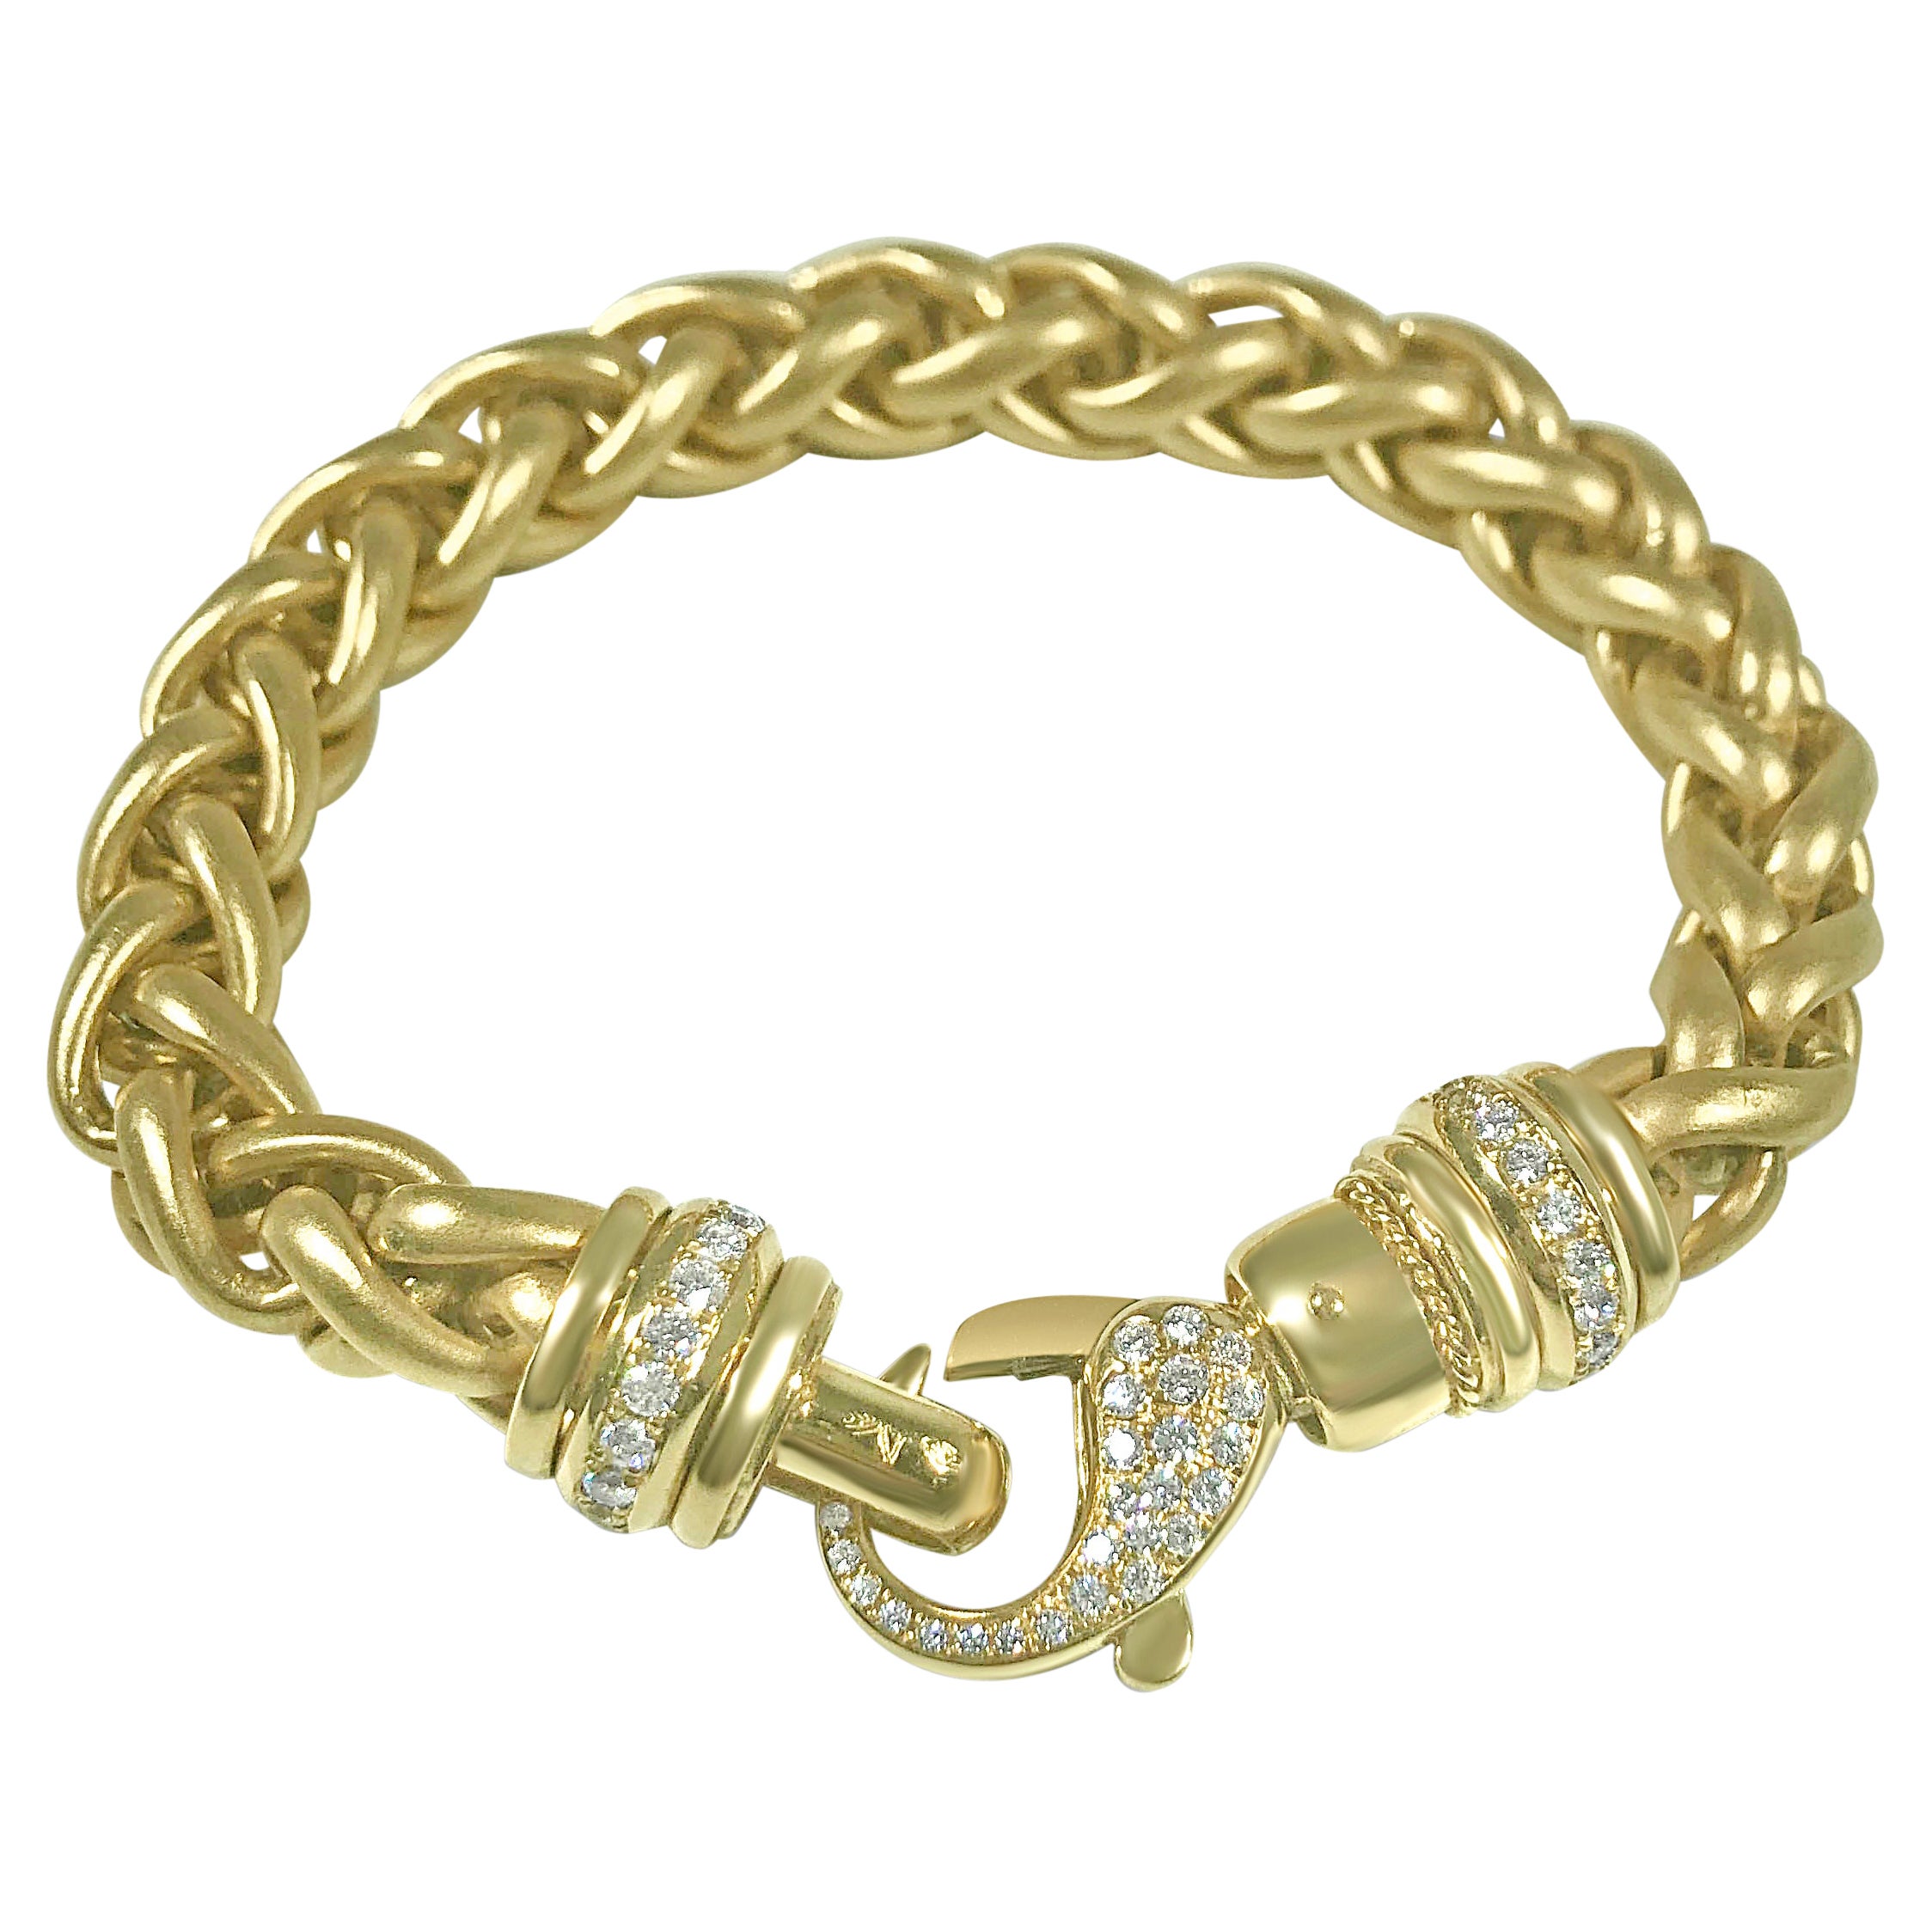 Matthia's & Claire Etrusca 18kt Yellow Gold Bracelet with Diamond Lobster Clasp